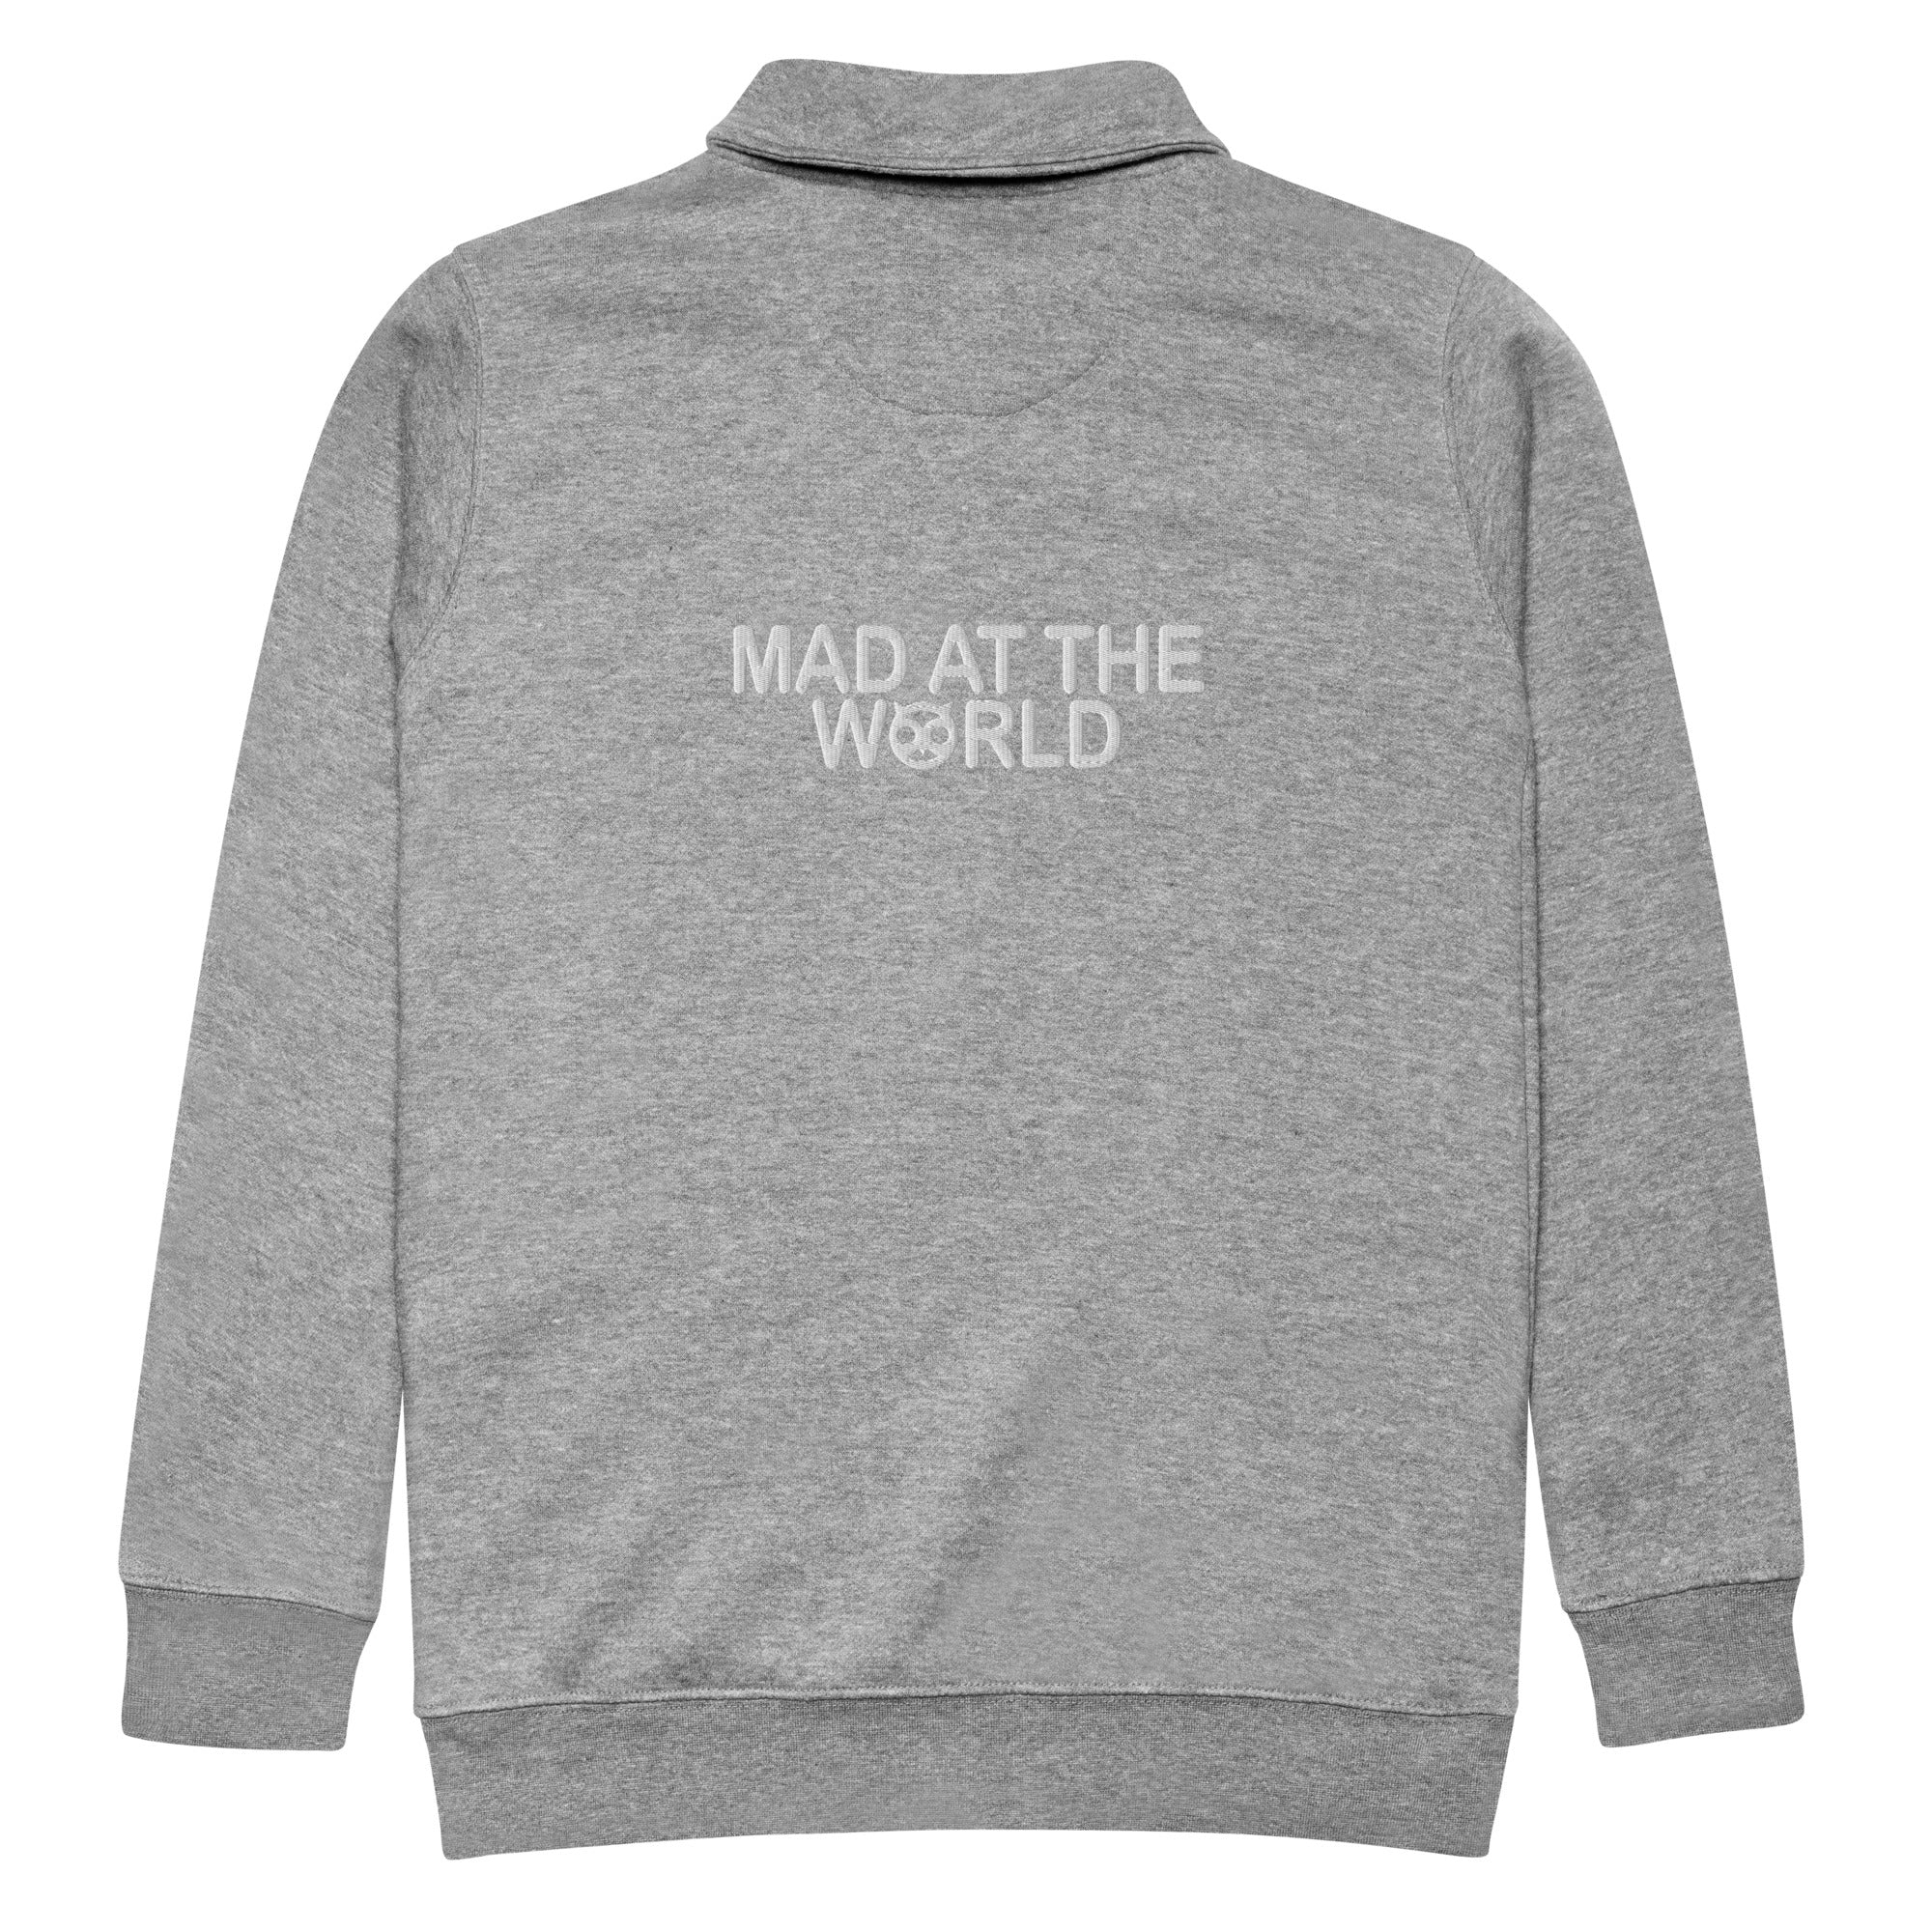 Mad at the World fleece pullover